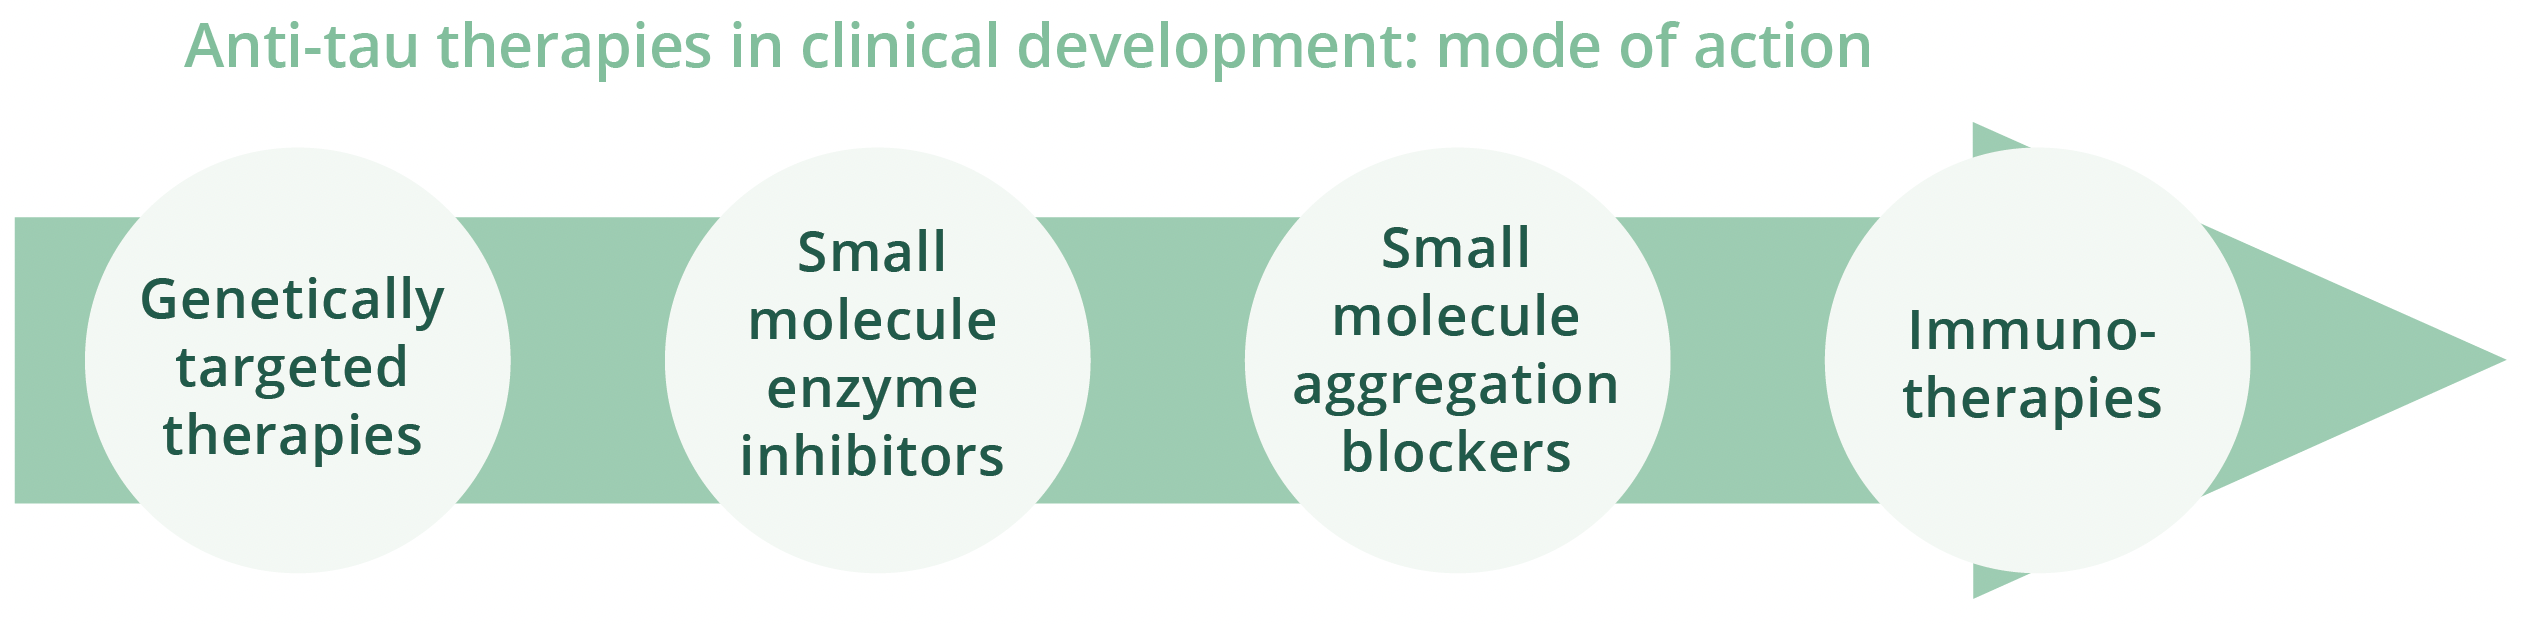 Anti-tau therapies in clinical development include genetically targeted therapies, small molecule enzyme inhibitors, small molecule aggregation blockers, small molecule enhancers and immunotherapies